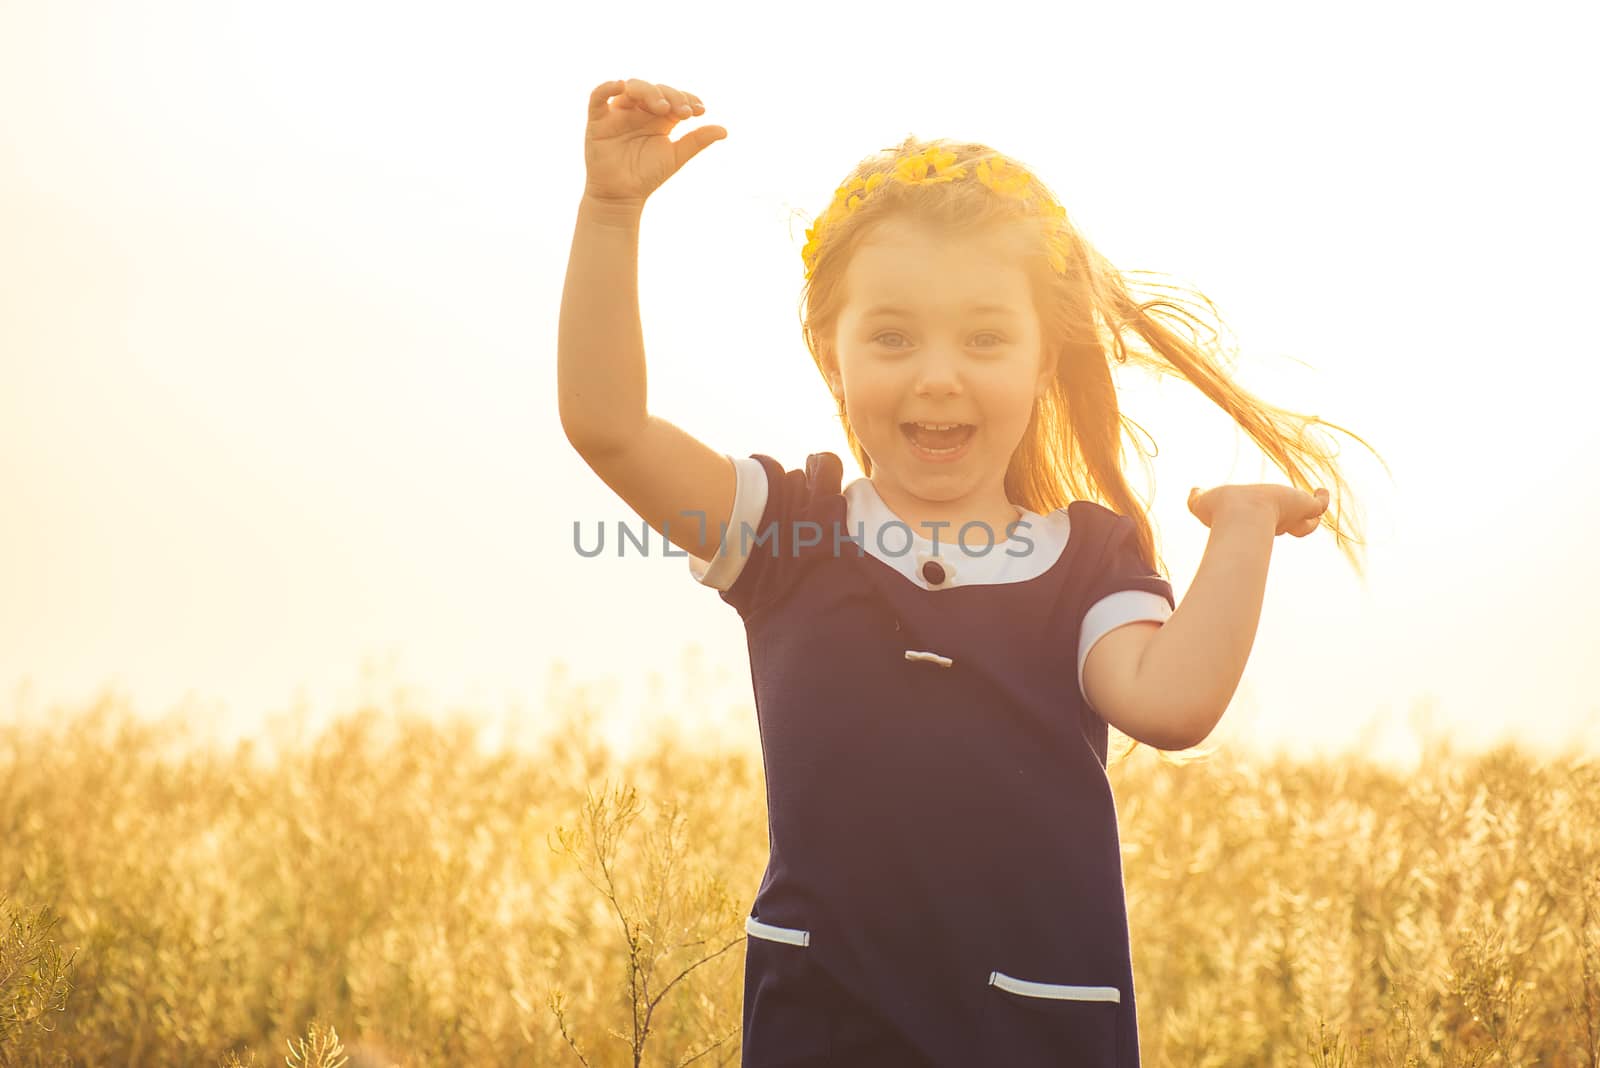 the beautiful little girl in a blue dress laughs, raising hands up by odindia